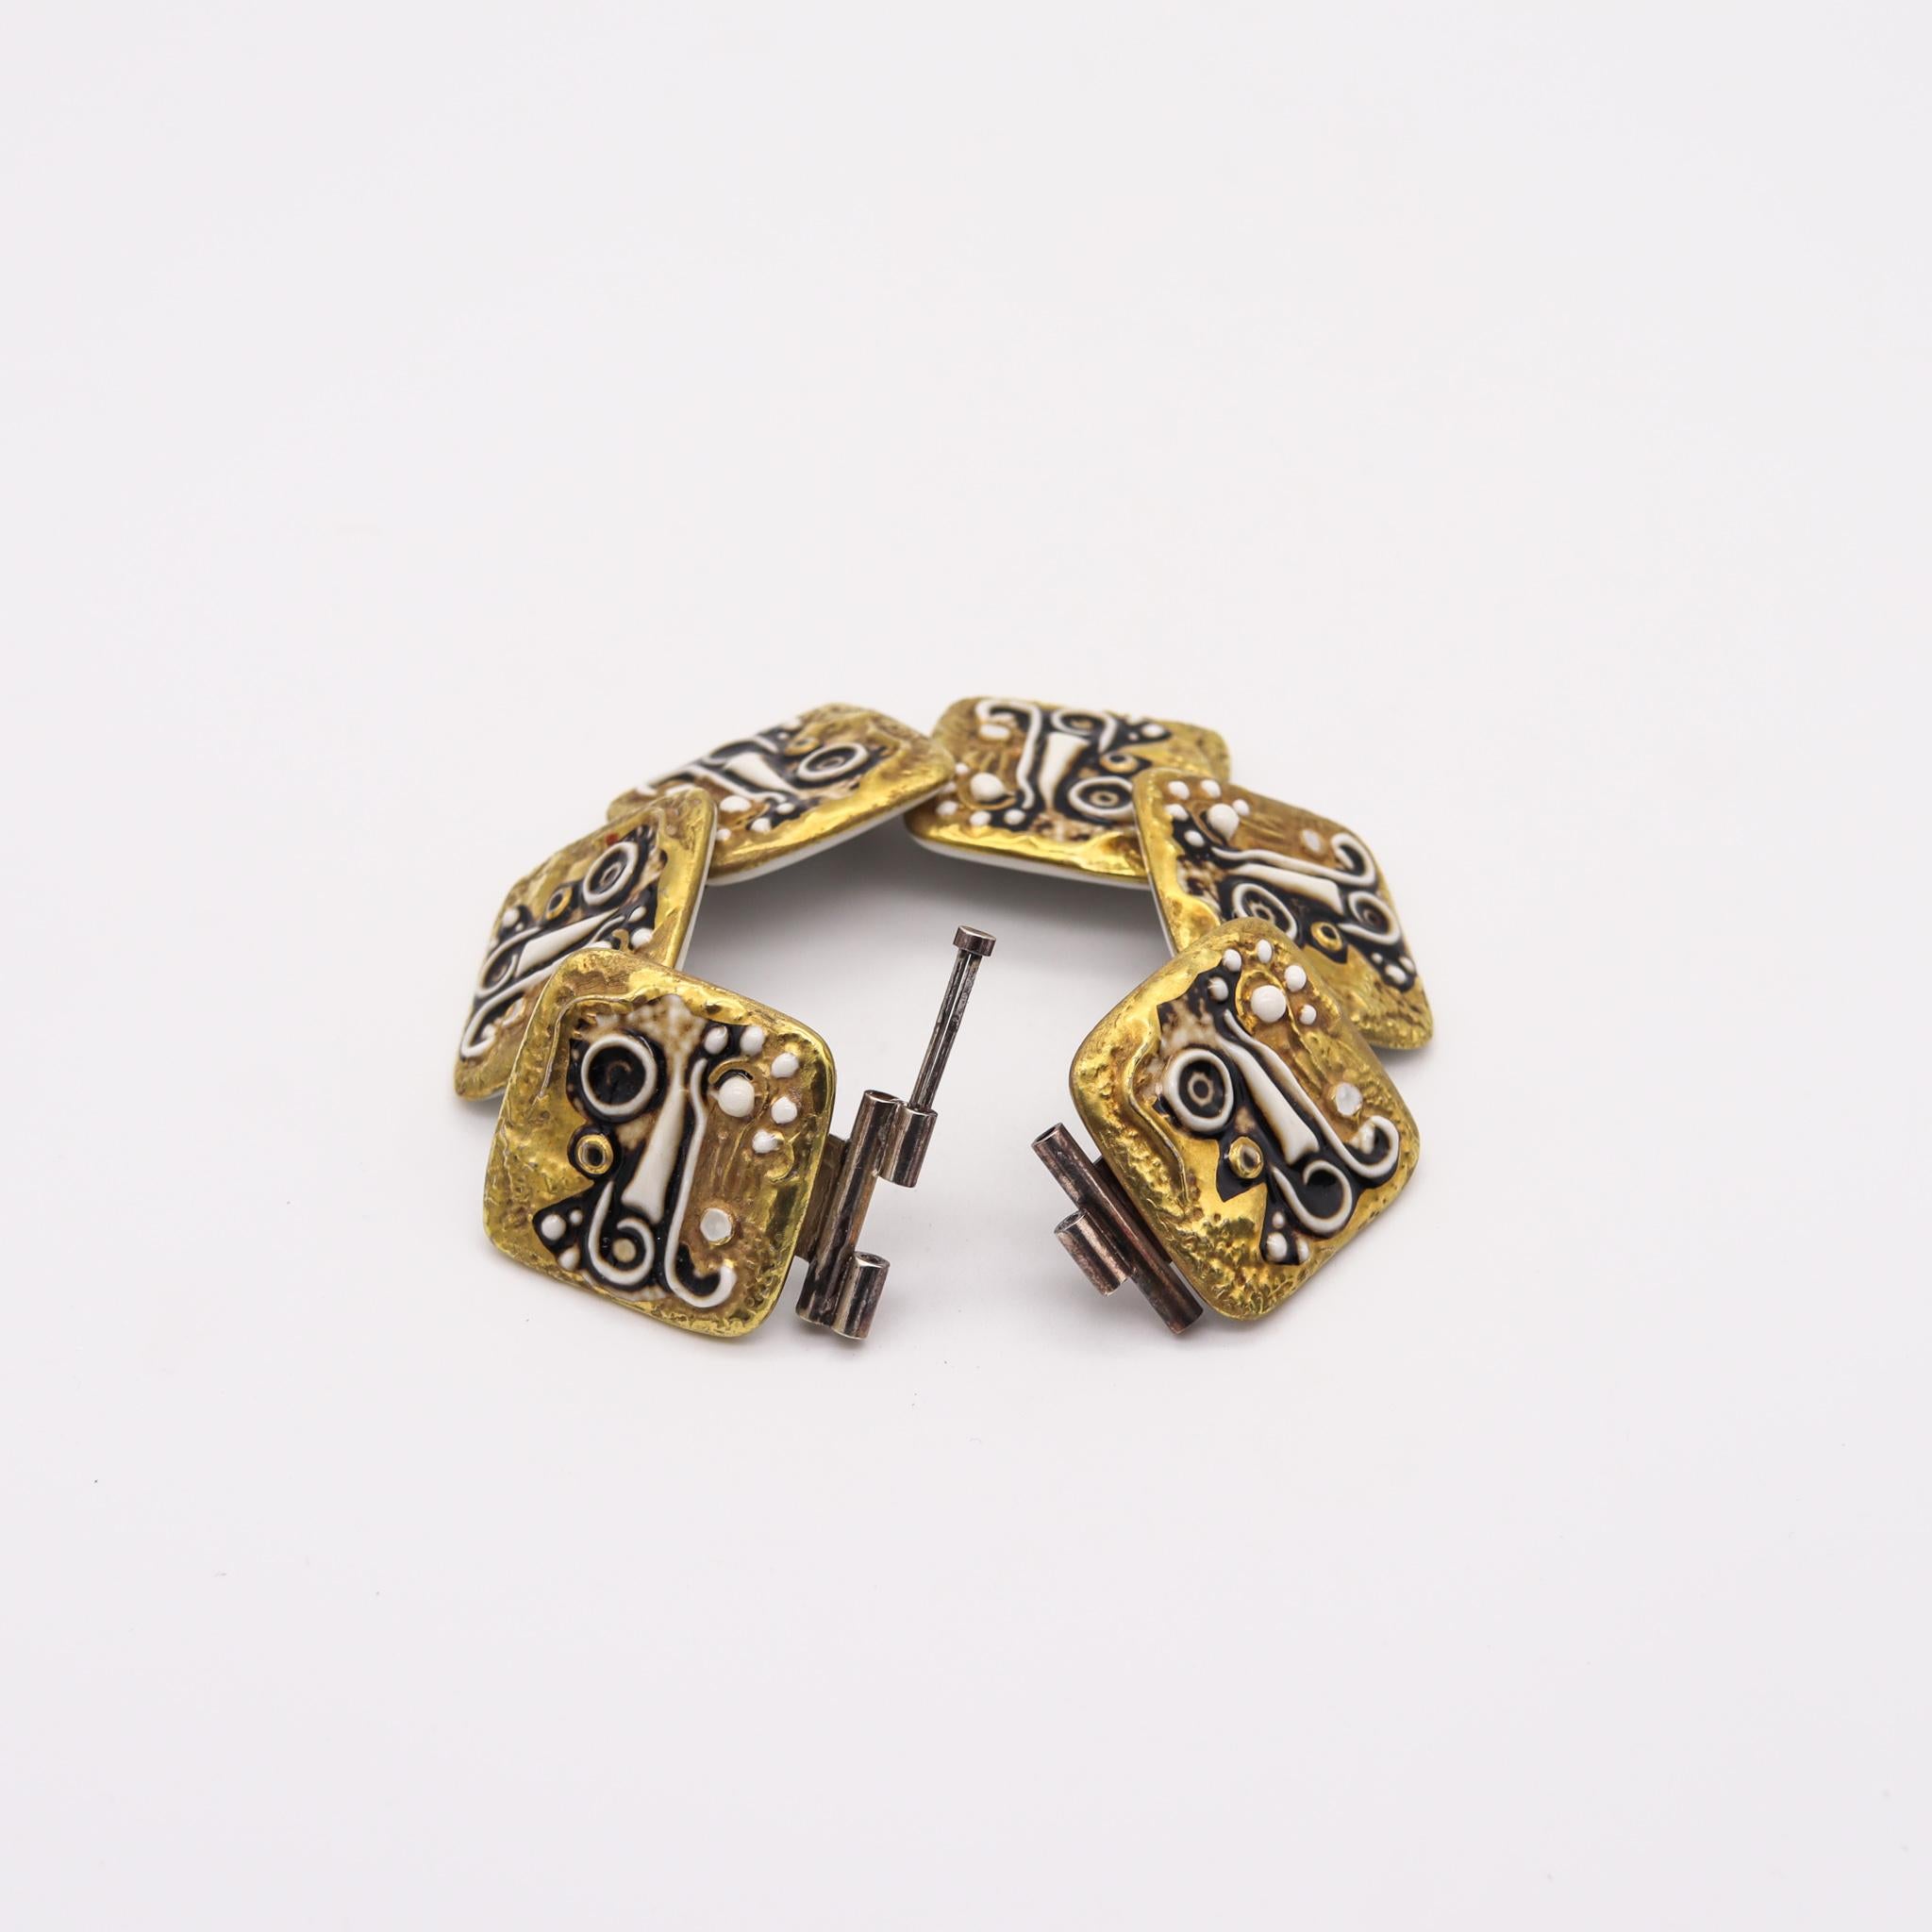 Nils Thorsson 1968 for Anton Michelsen Abstract Porcelain Bracelet in Sterling In Excellent Condition For Sale In Miami, FL